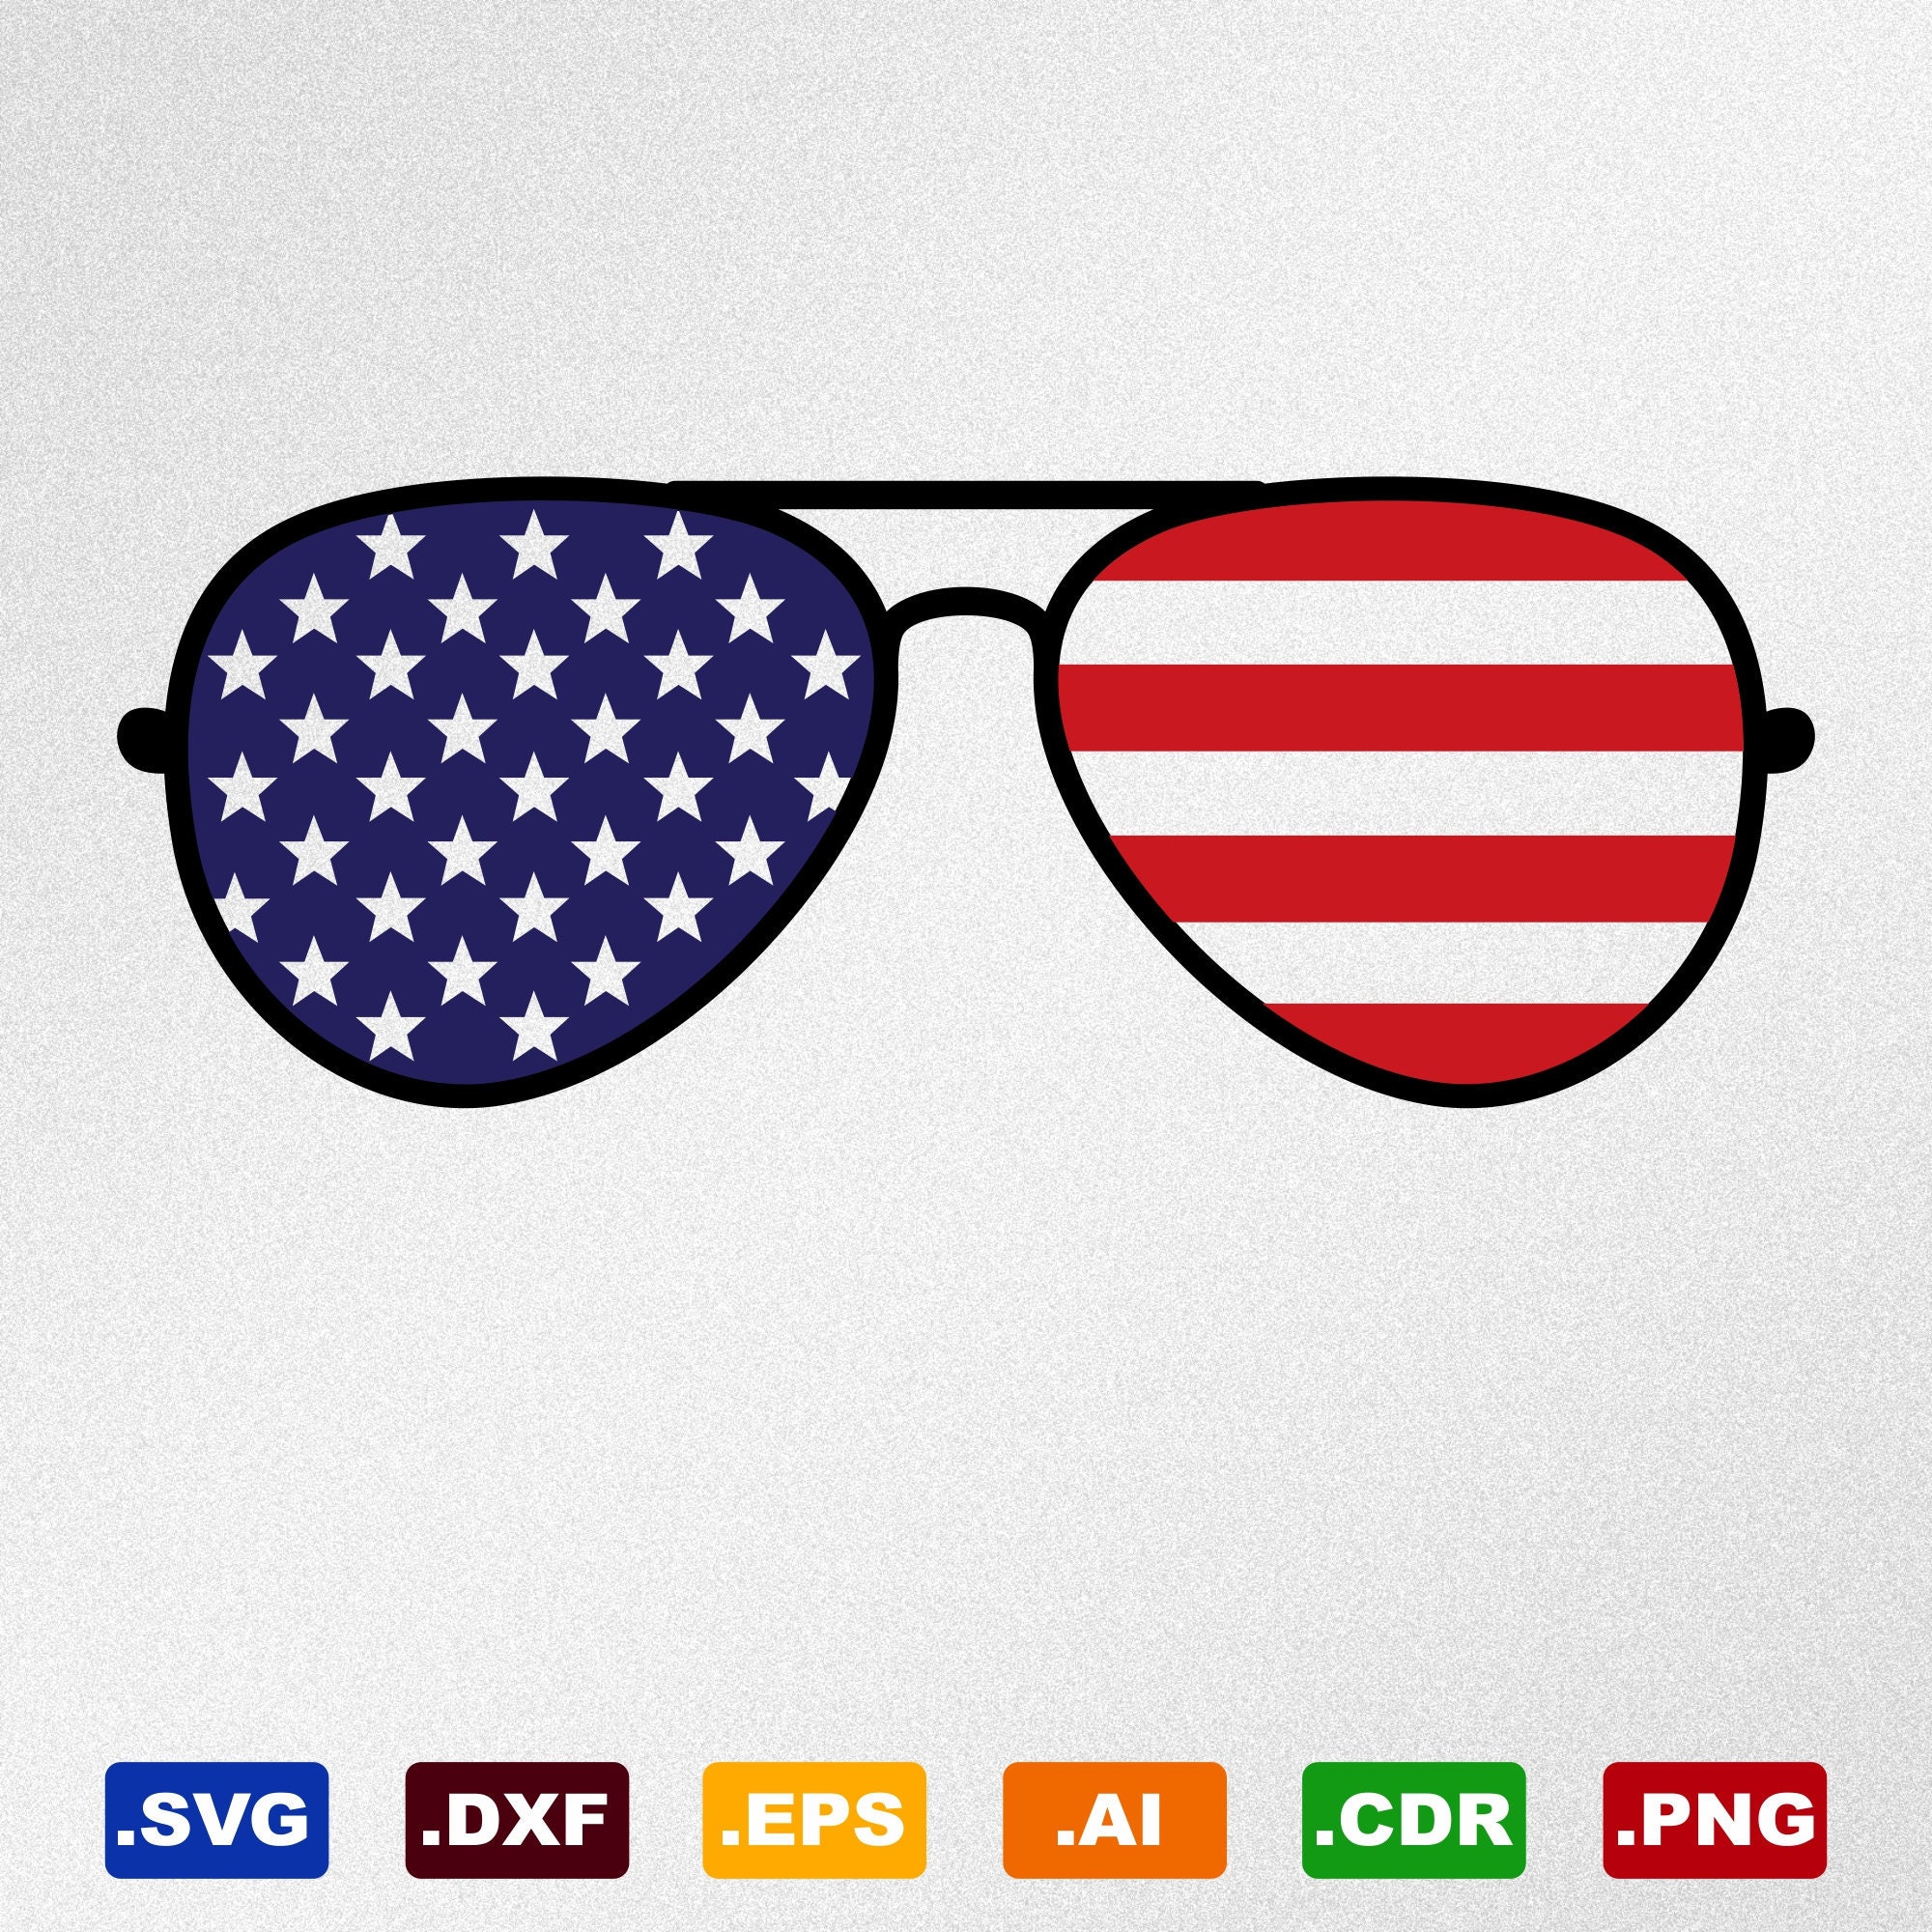 Aviator Sunglasses American Flag Svg, Dxf, Eps, Ai, Cdr Vector Files for  Silhouette, Cricut, Cutting Plotter, Png File 